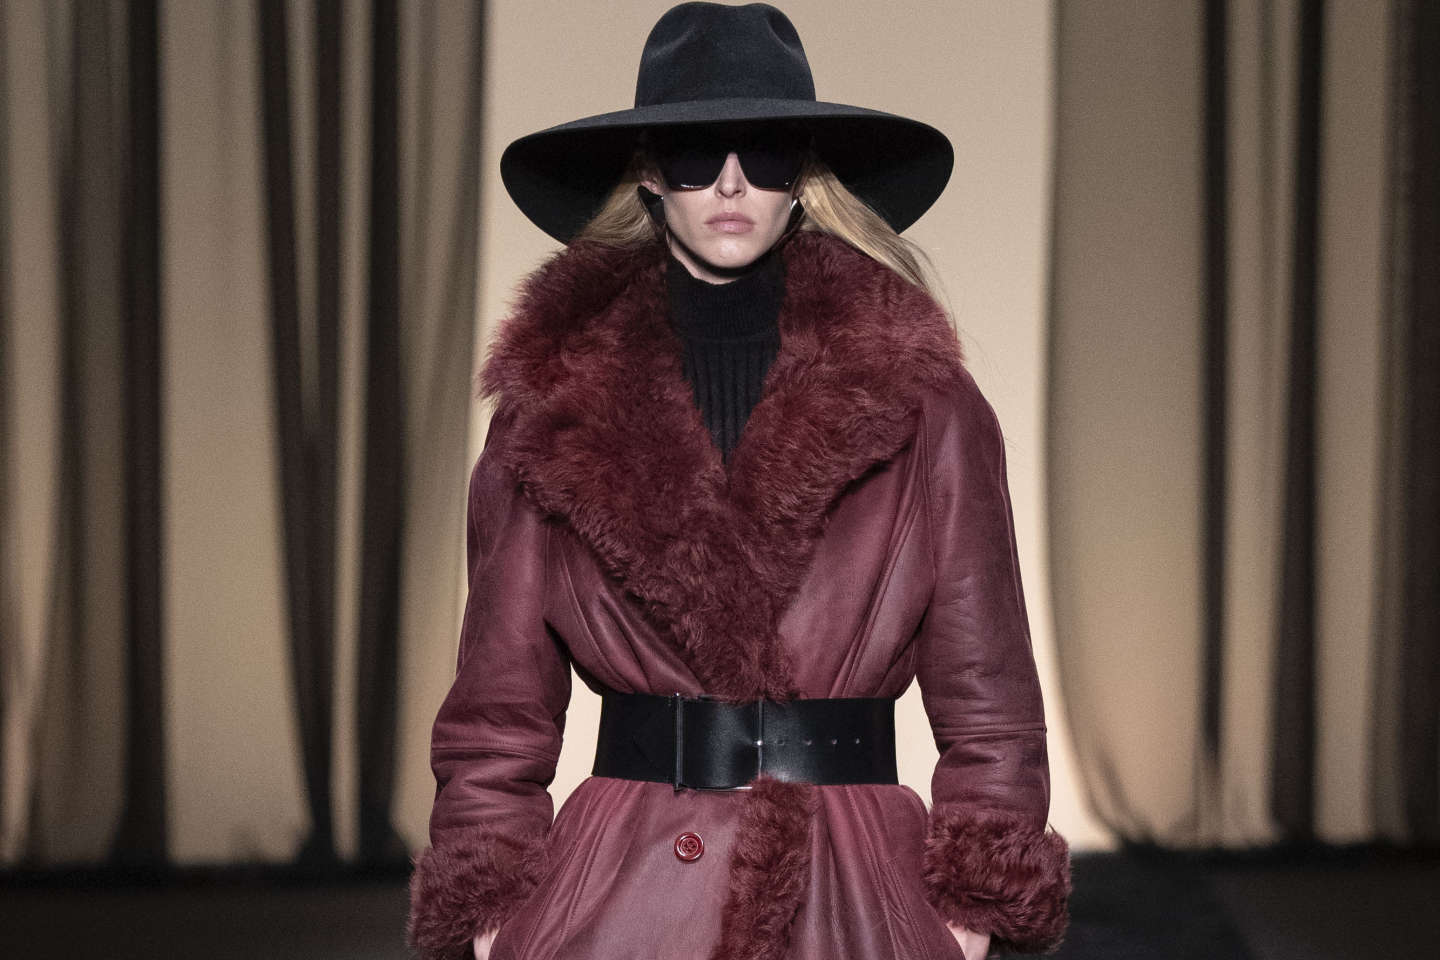 Straight skirt, XXL coat and heeled boots: Milan outlines the trends for winter 2023-2024